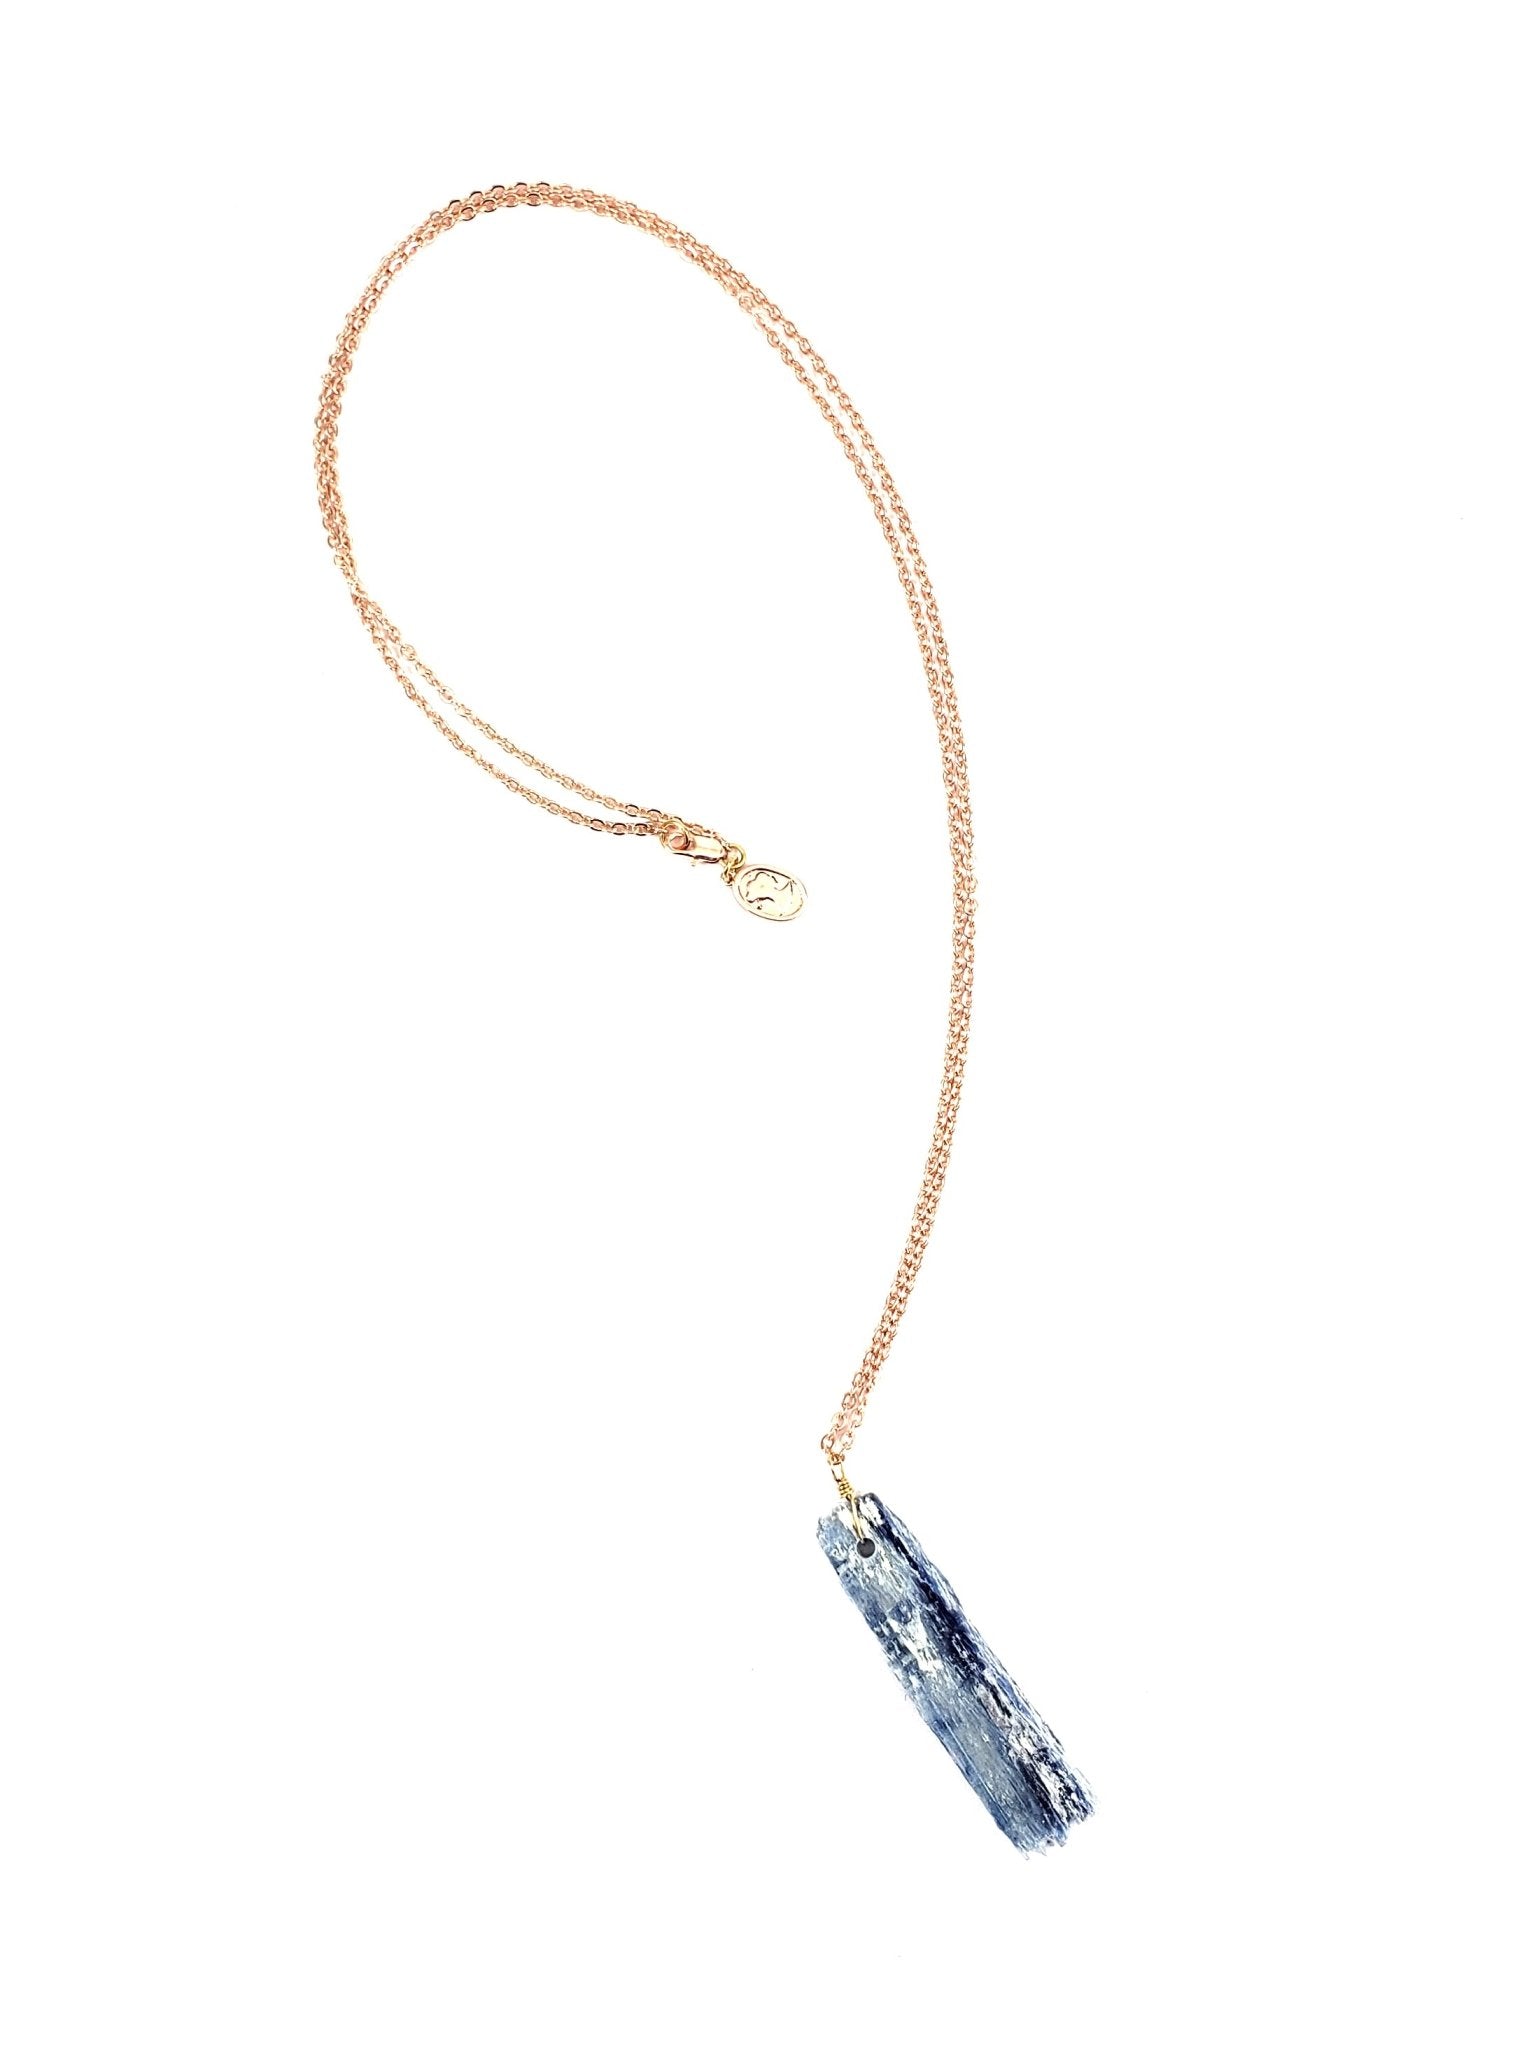 Blue Kyanite Necklace - Ariana Ost